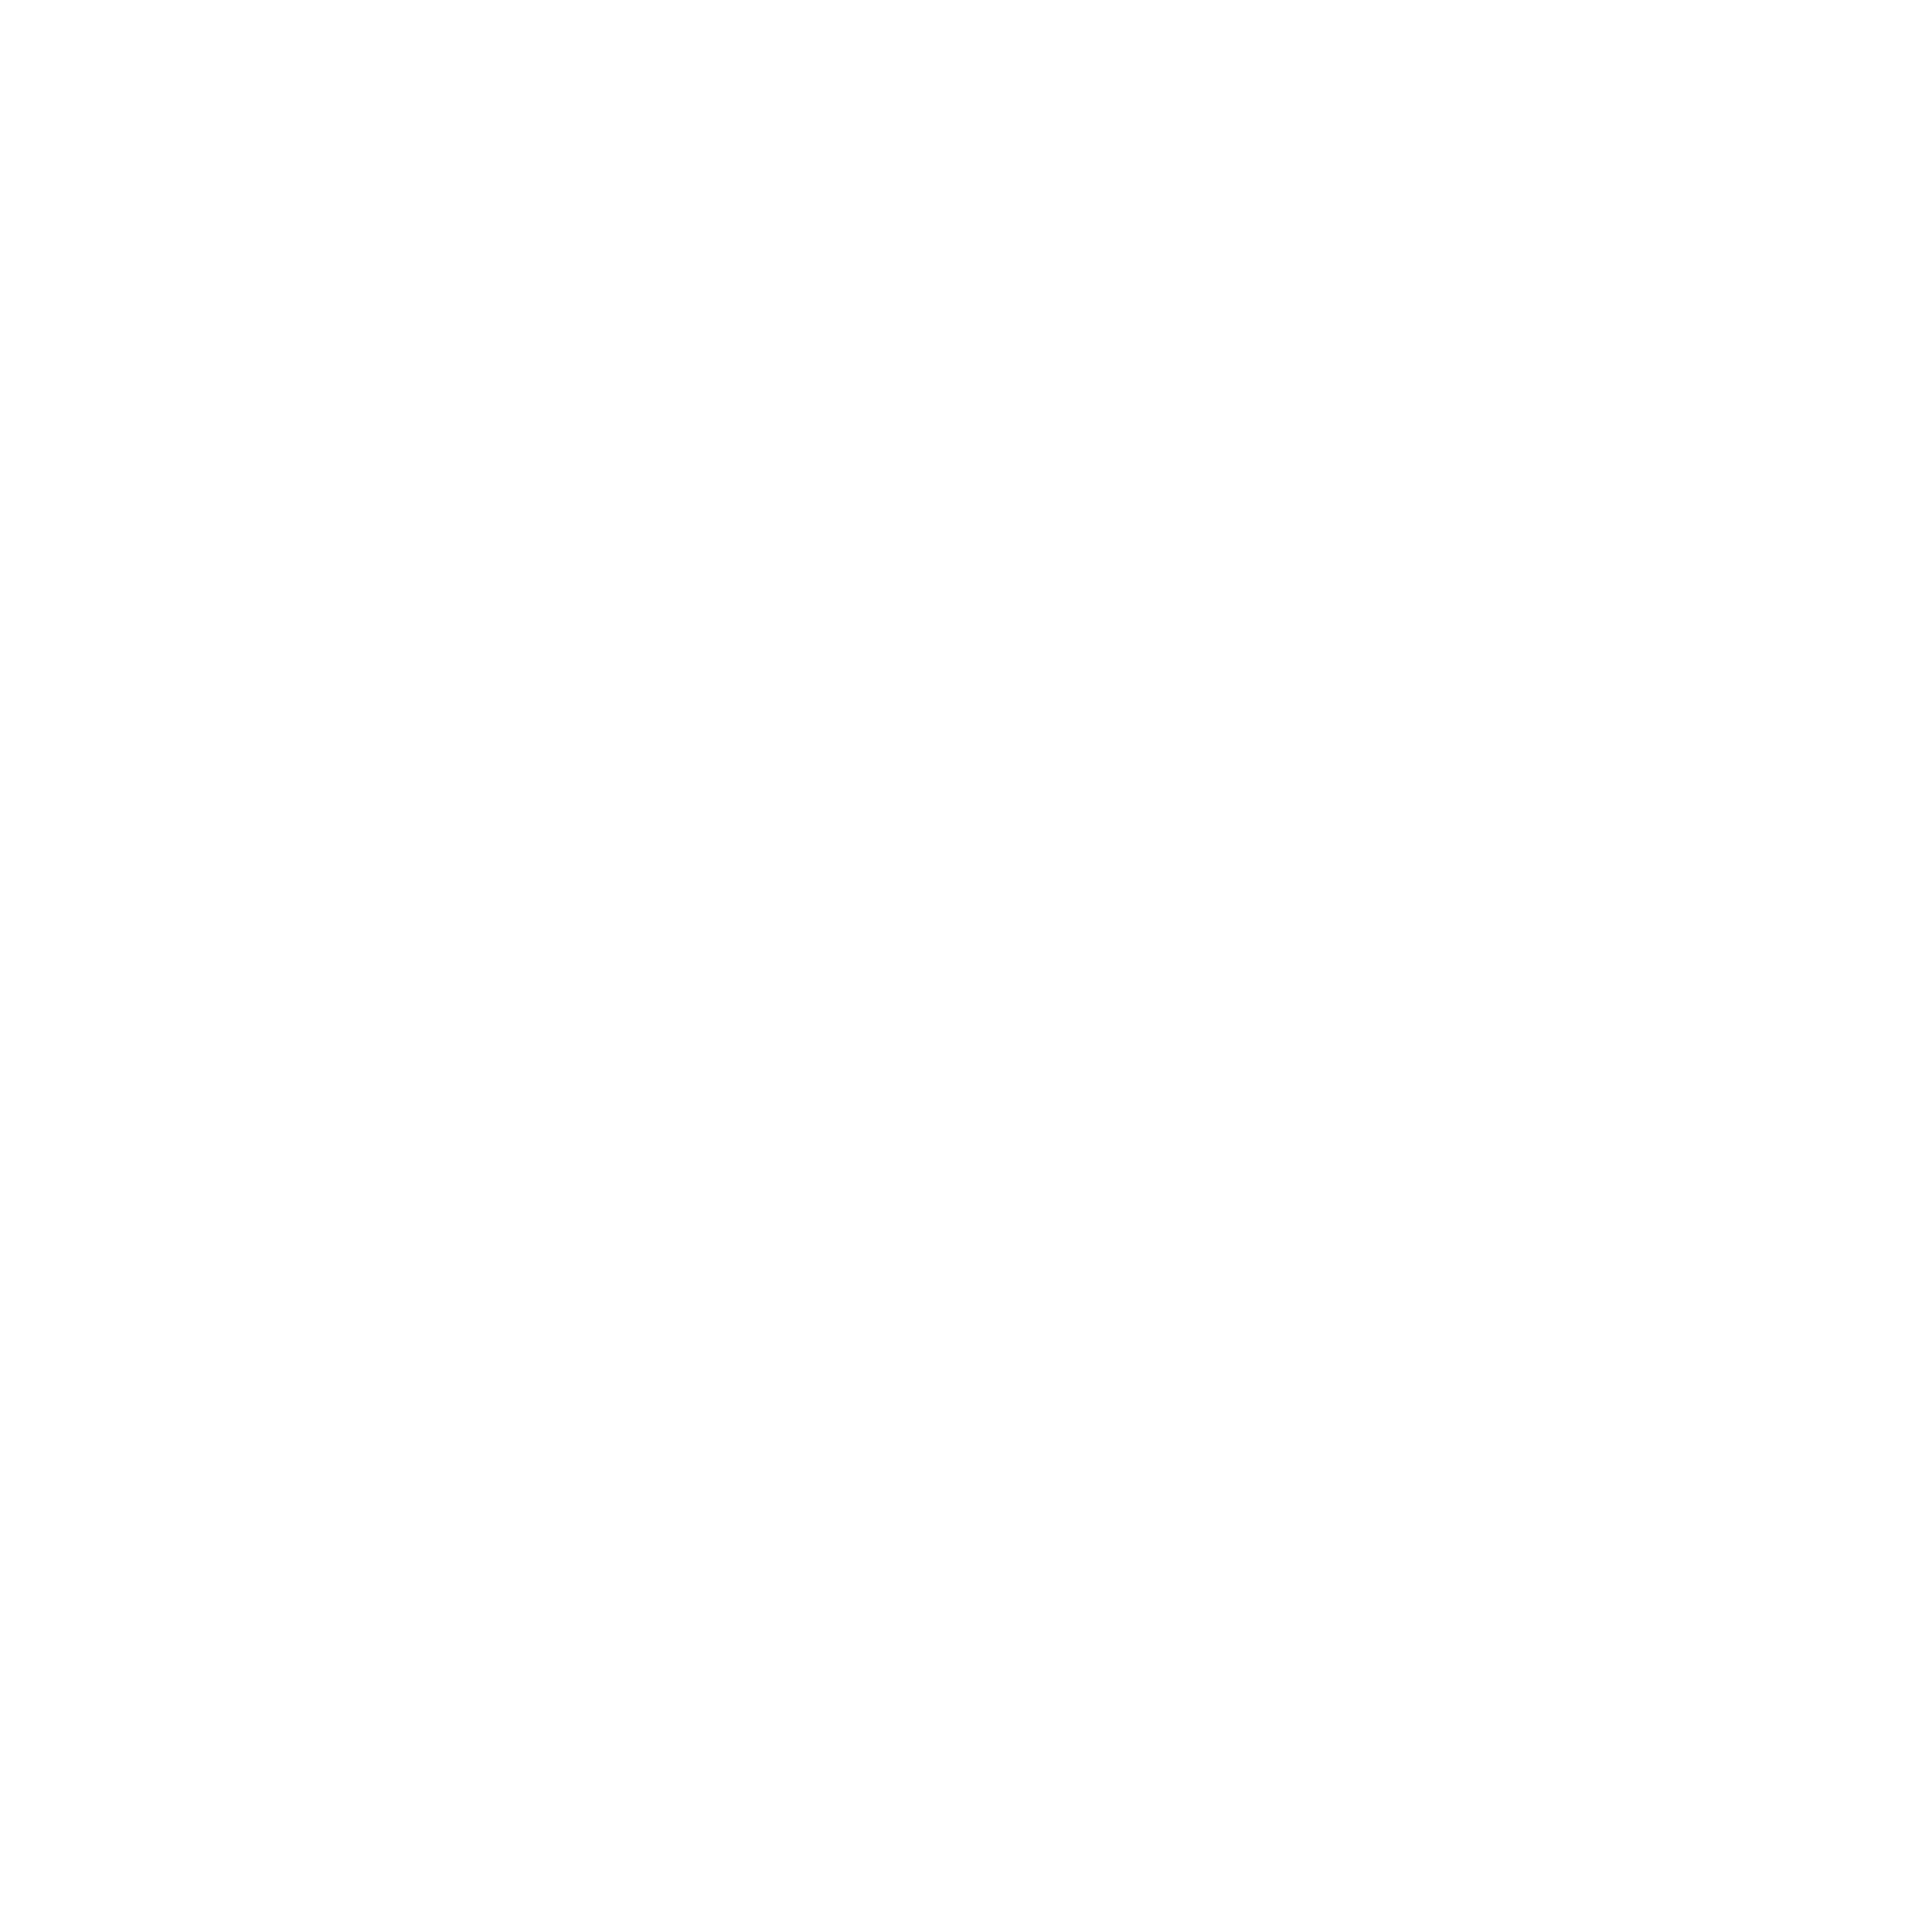 search, mail, and devices icons